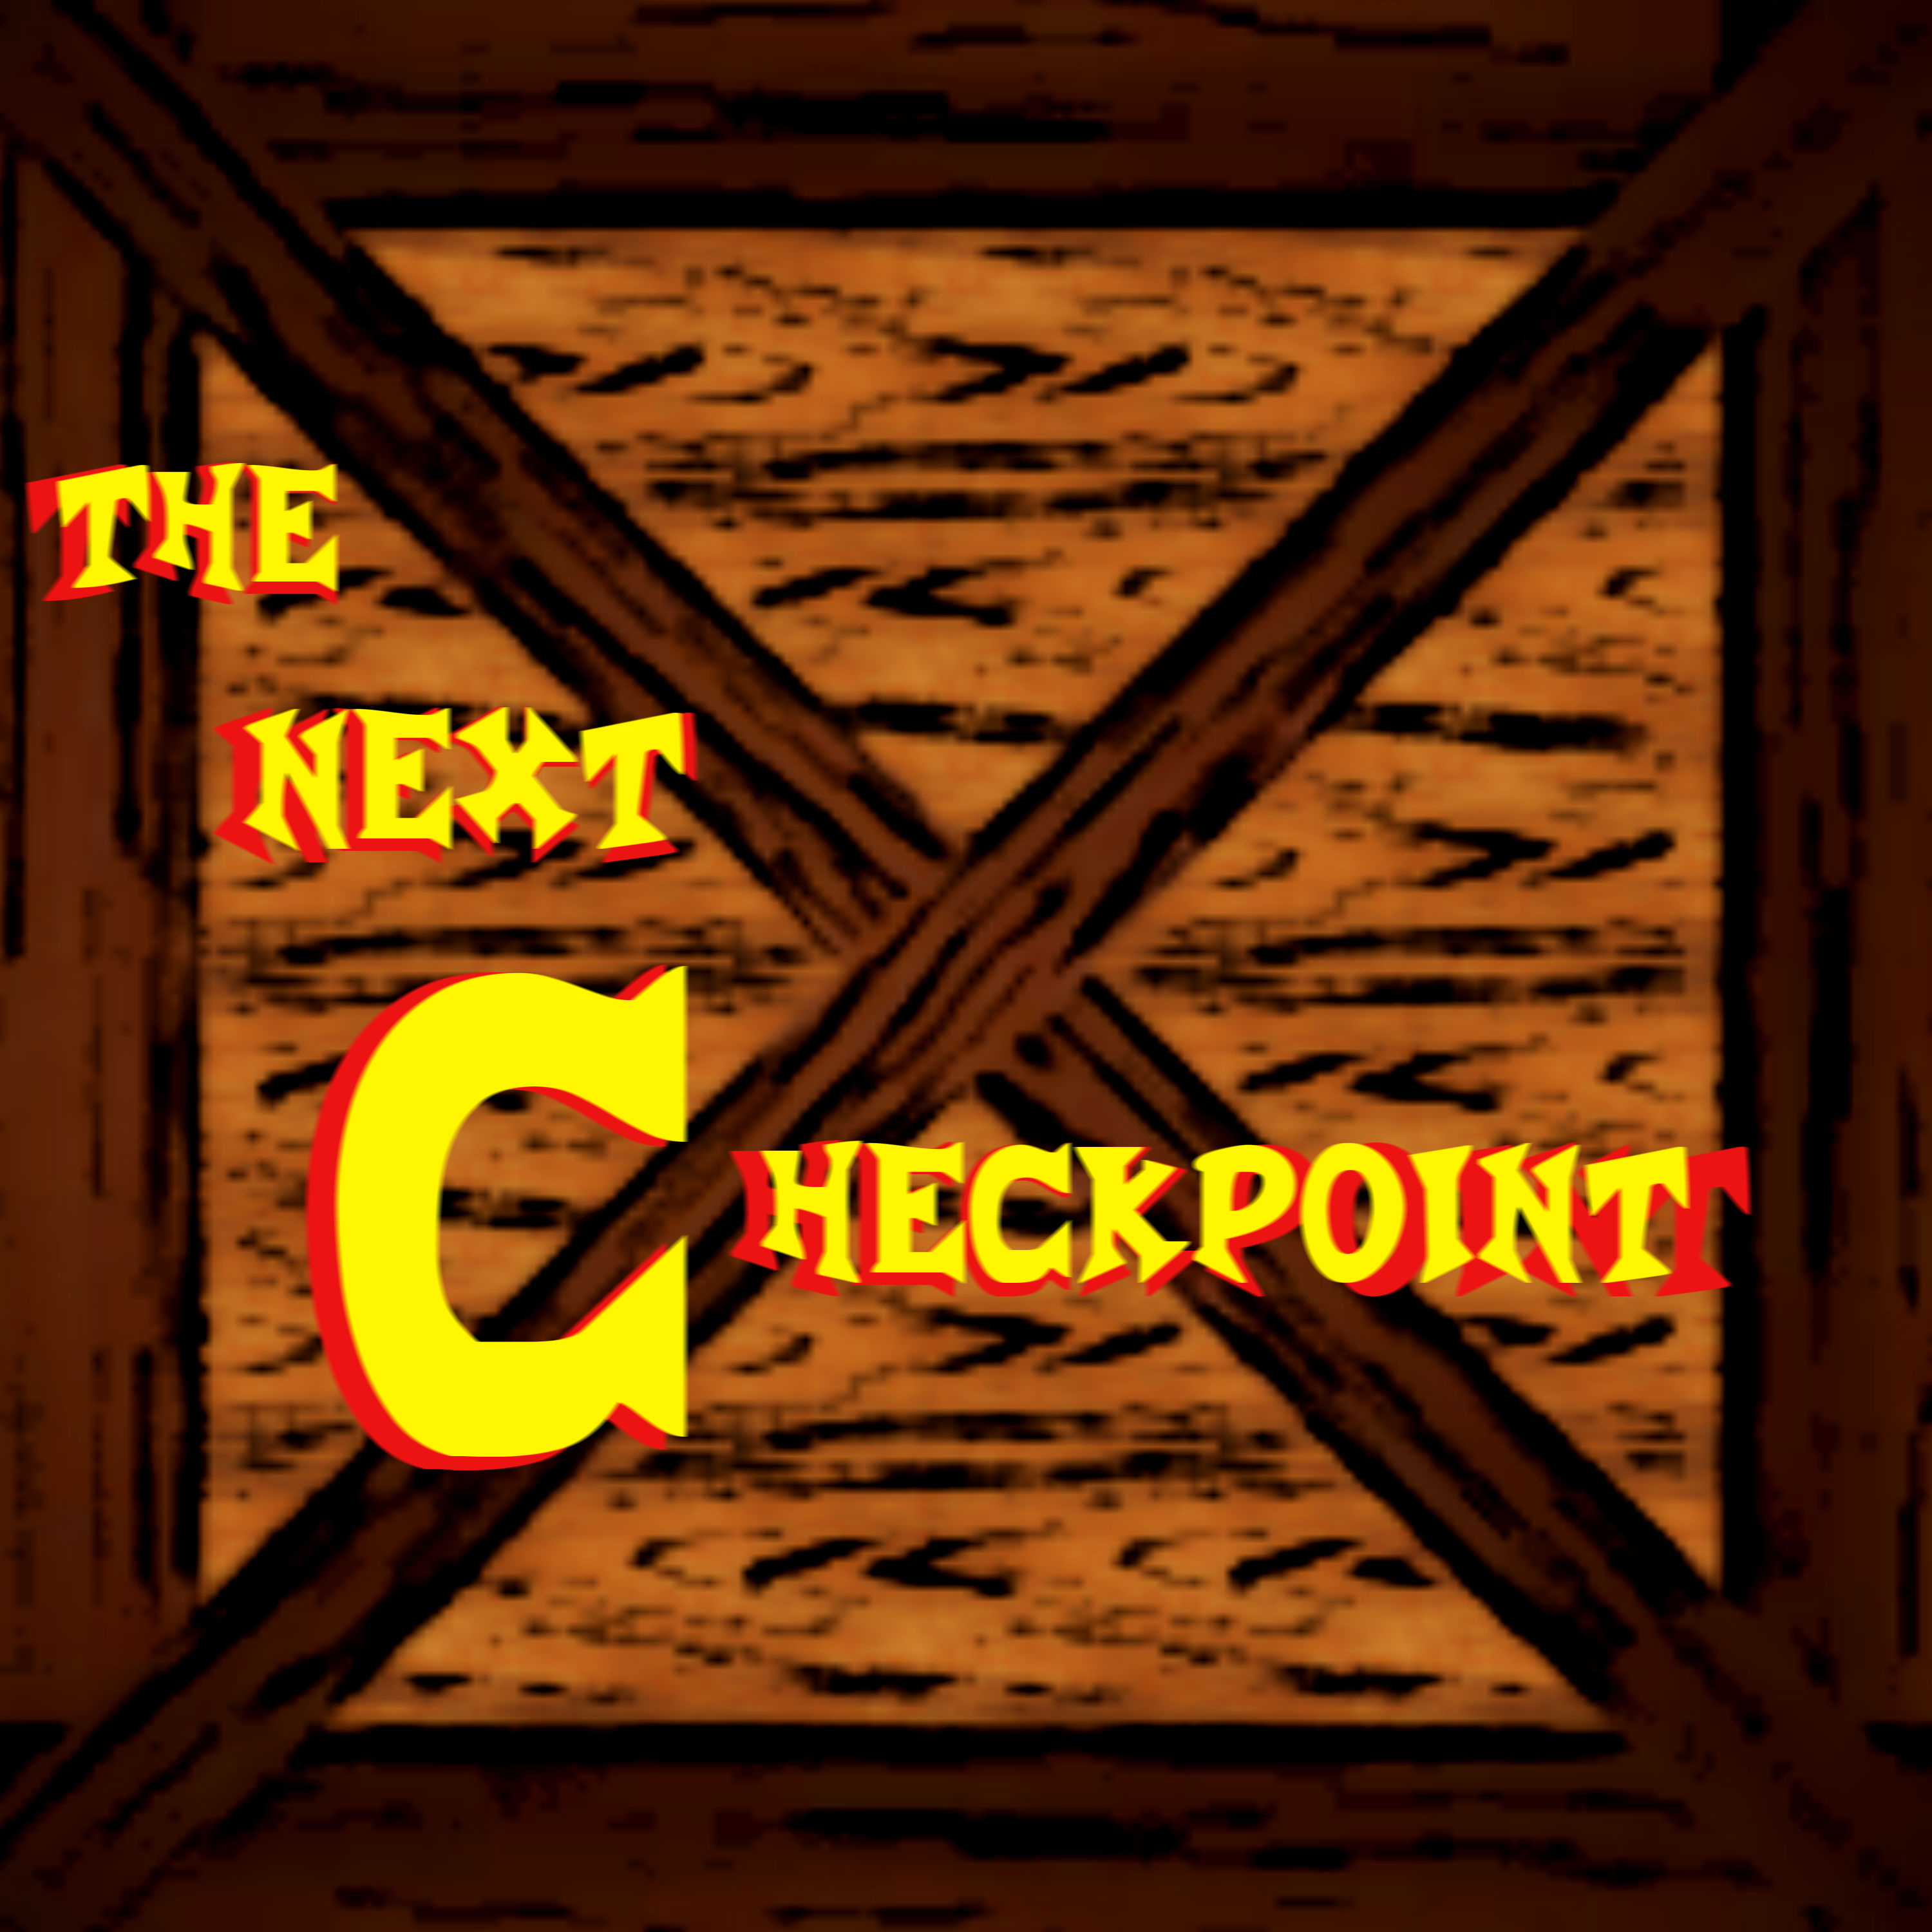 Next Checkpoint episode 4: Which Game Got Leaked For The Switch?